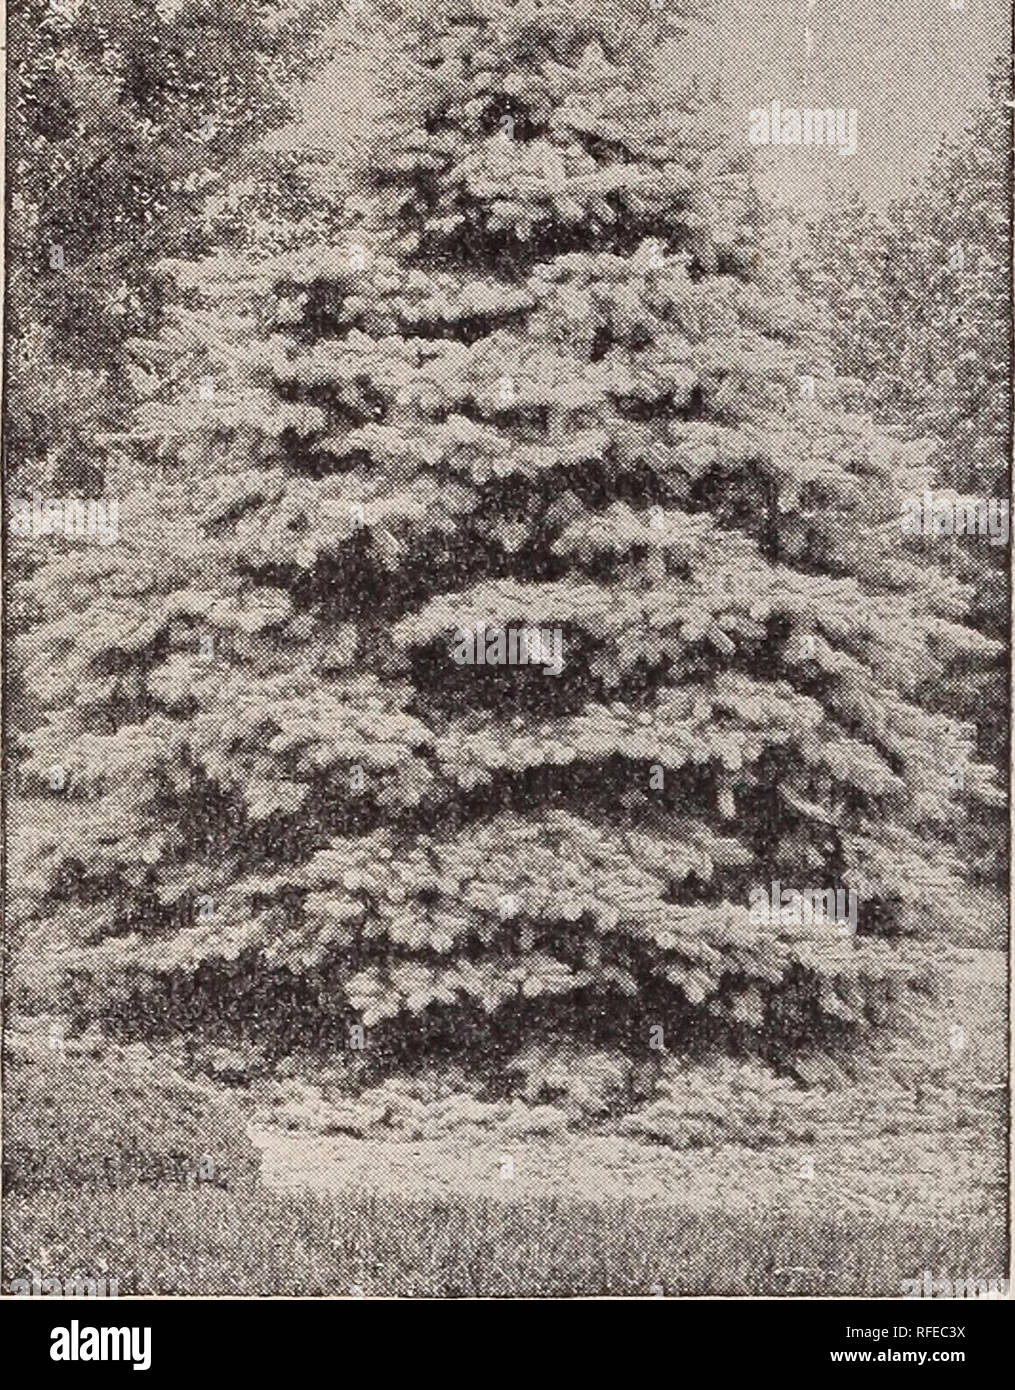 . Choice tree and hardy shrubs. Nursery stock New York (State) New York Catalogs; Trees Seedlings Catalogs; Plants, Ornamental Catalogs; Shrubs Catalogs; Flowers Catalogs; Fruit Catalogs. 22 Fred'k W. Kelsey, 150 Broadway, New York.. Colorado Blue Spruce. PICEA pungens glauca. Colorado Blue Spruce. Fine, compact, vigorous habit and remarkably beautiful foliage; not excelled by any other Evergreen. Perfectly hardy, and grown successfully where other Evergreens fail. It will withstand the coldest seasons, and in appearance surpasses any of the taller Con- iferous trees, with perhaps the exceptio Stock Photo